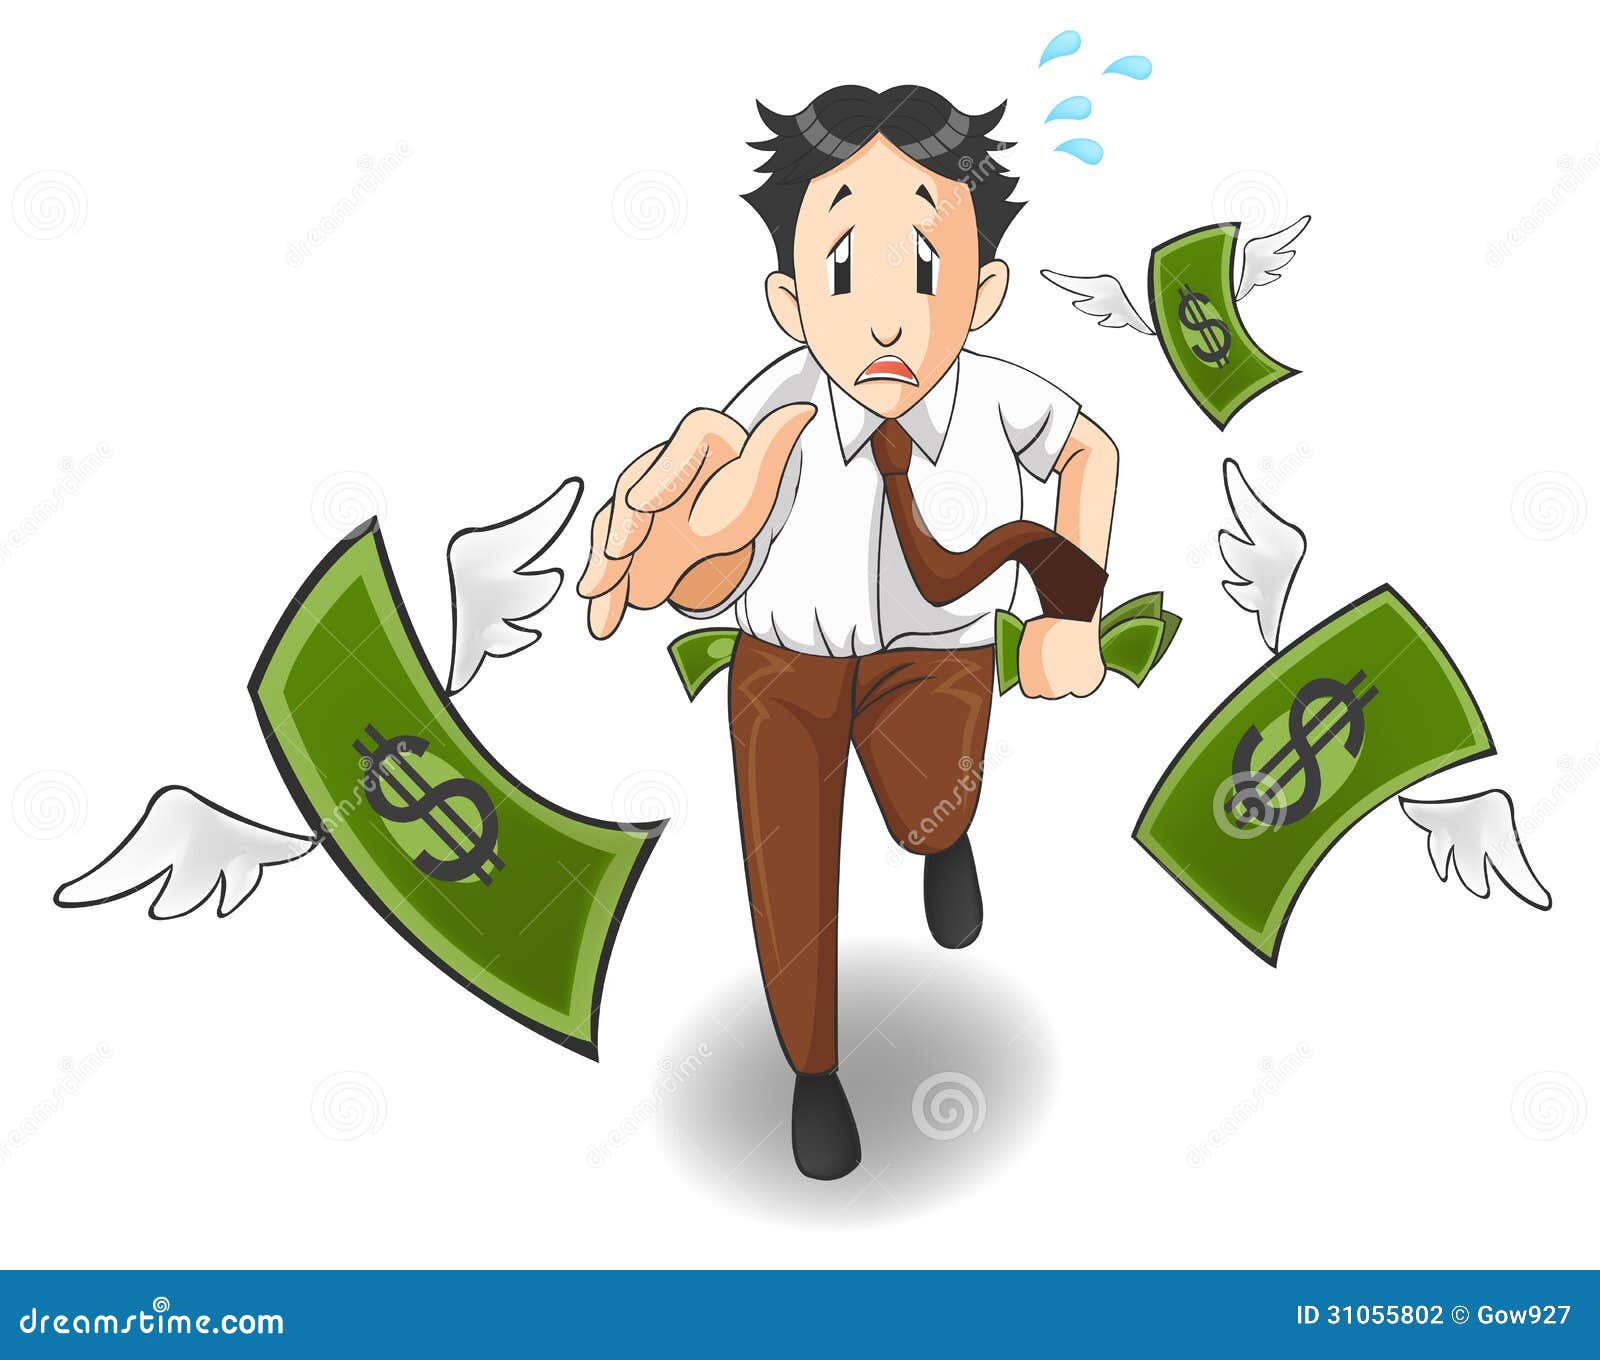 clipart money flying away - photo #5